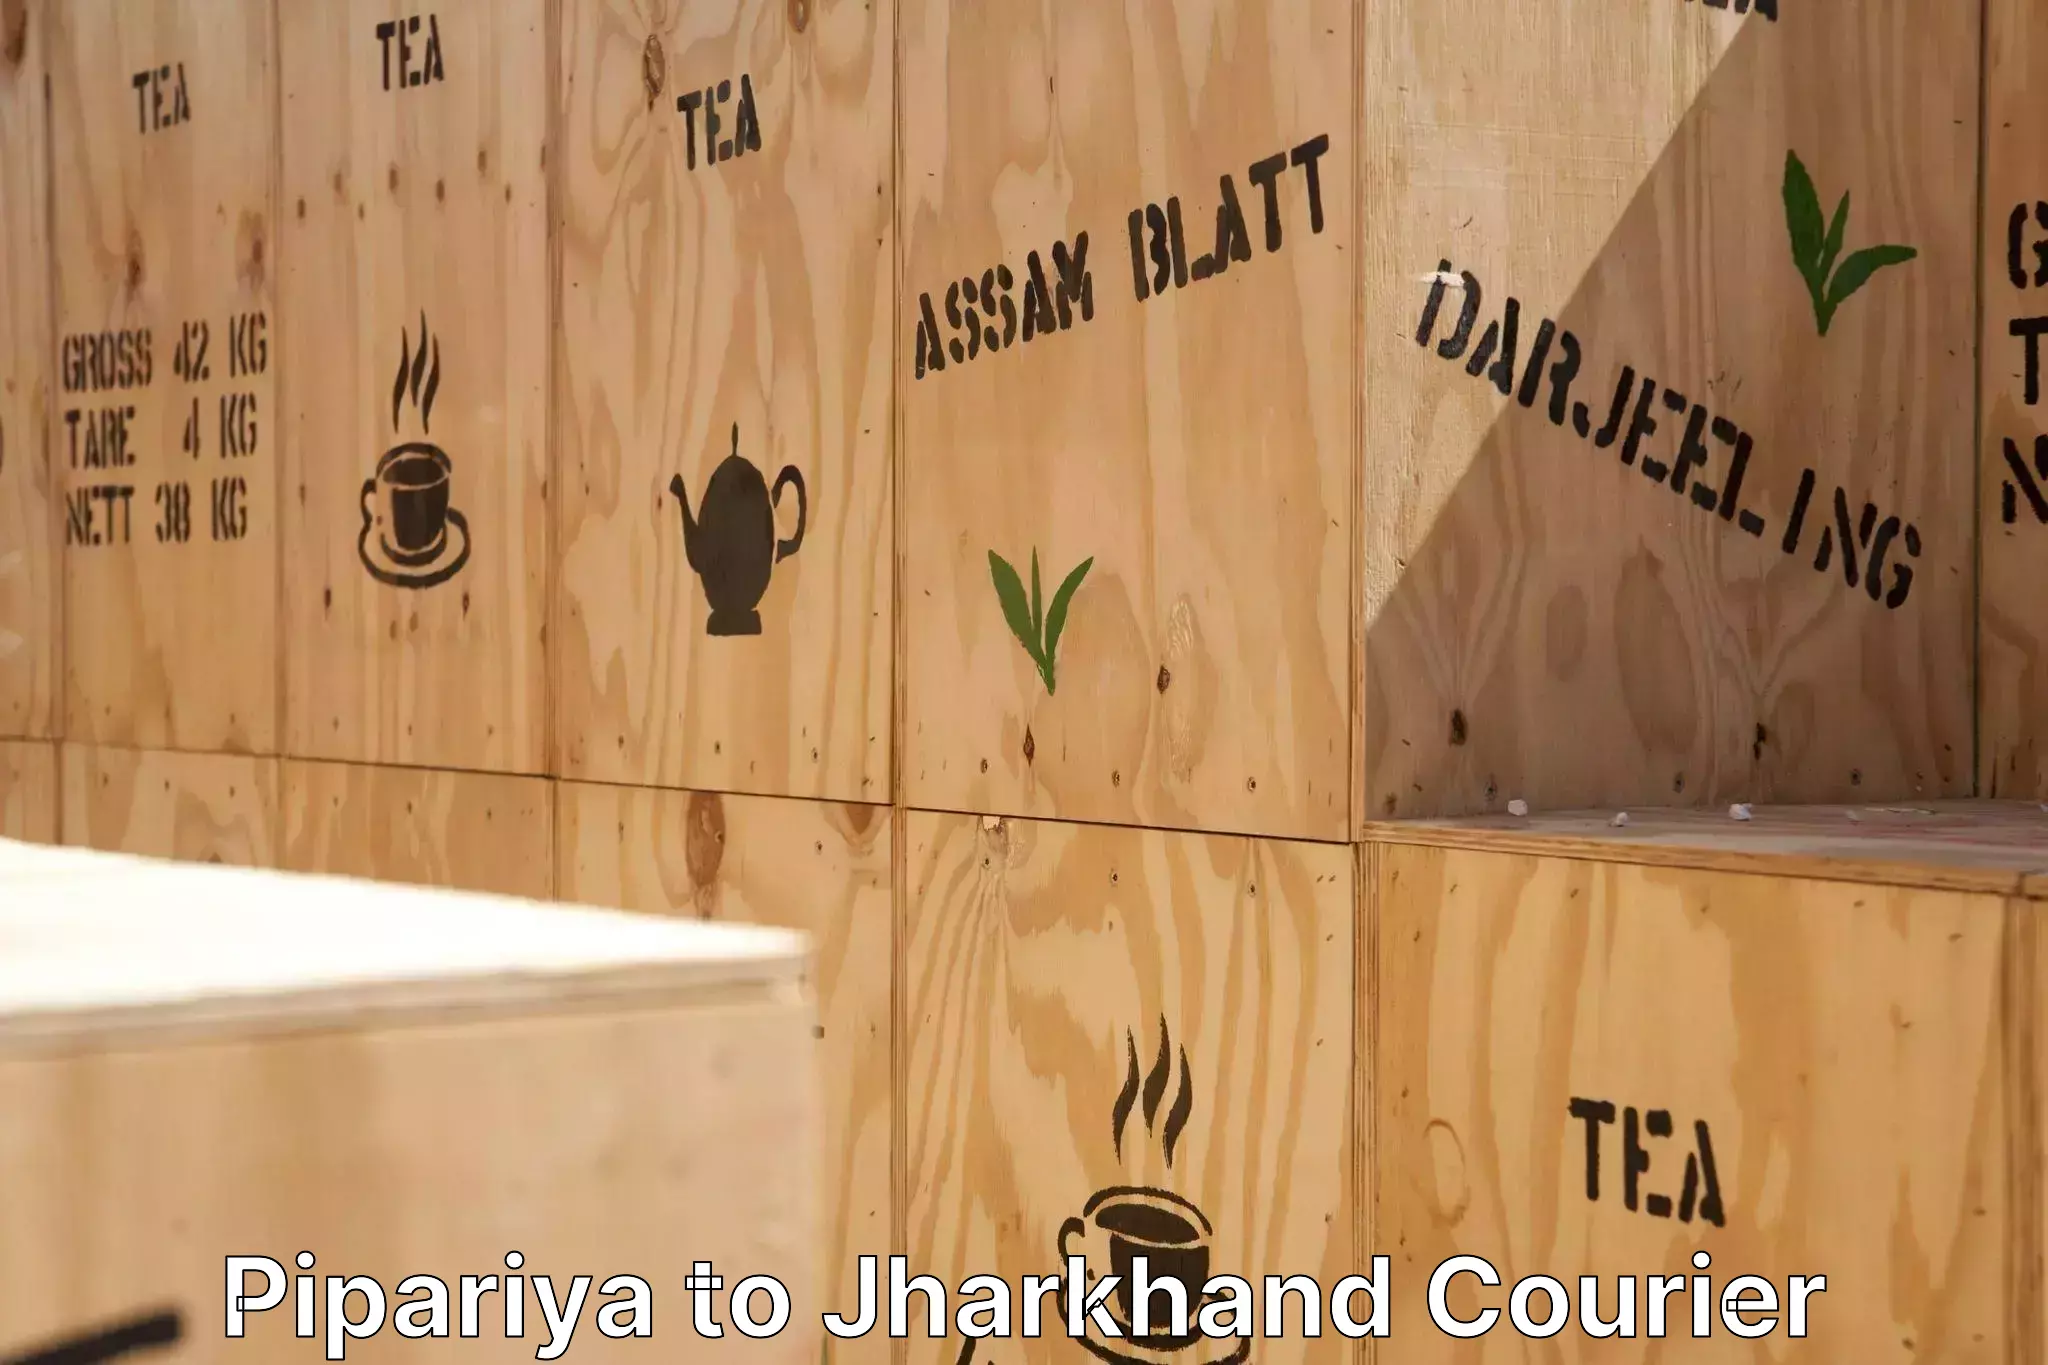 Furniture relocation experts Pipariya to Jharkhand